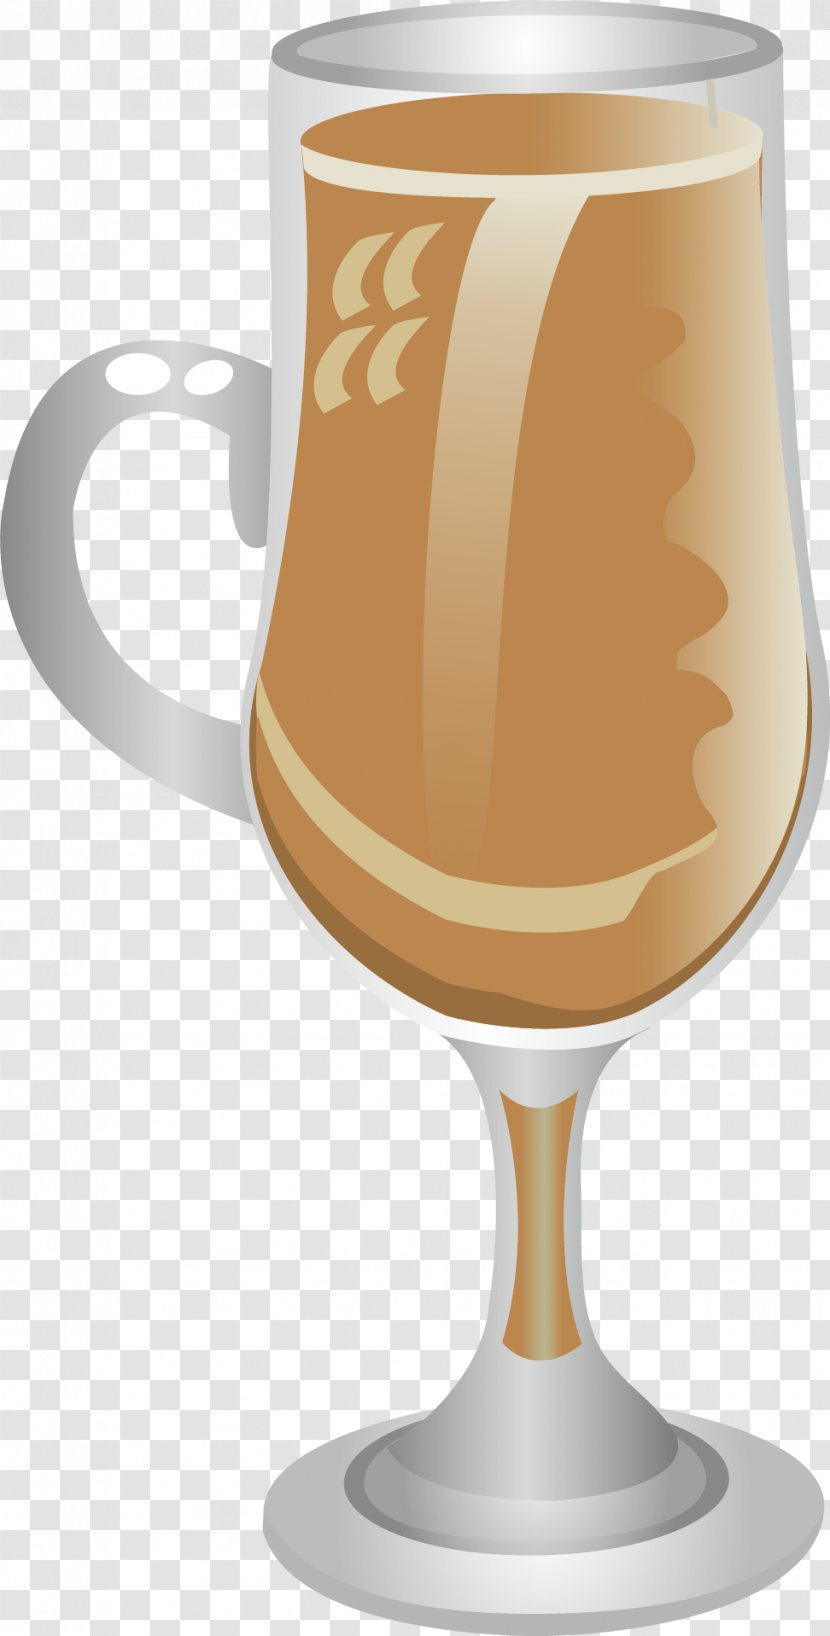 Tea Iced Coffee Milk Wine Glass - Cup Of Transparent PNG